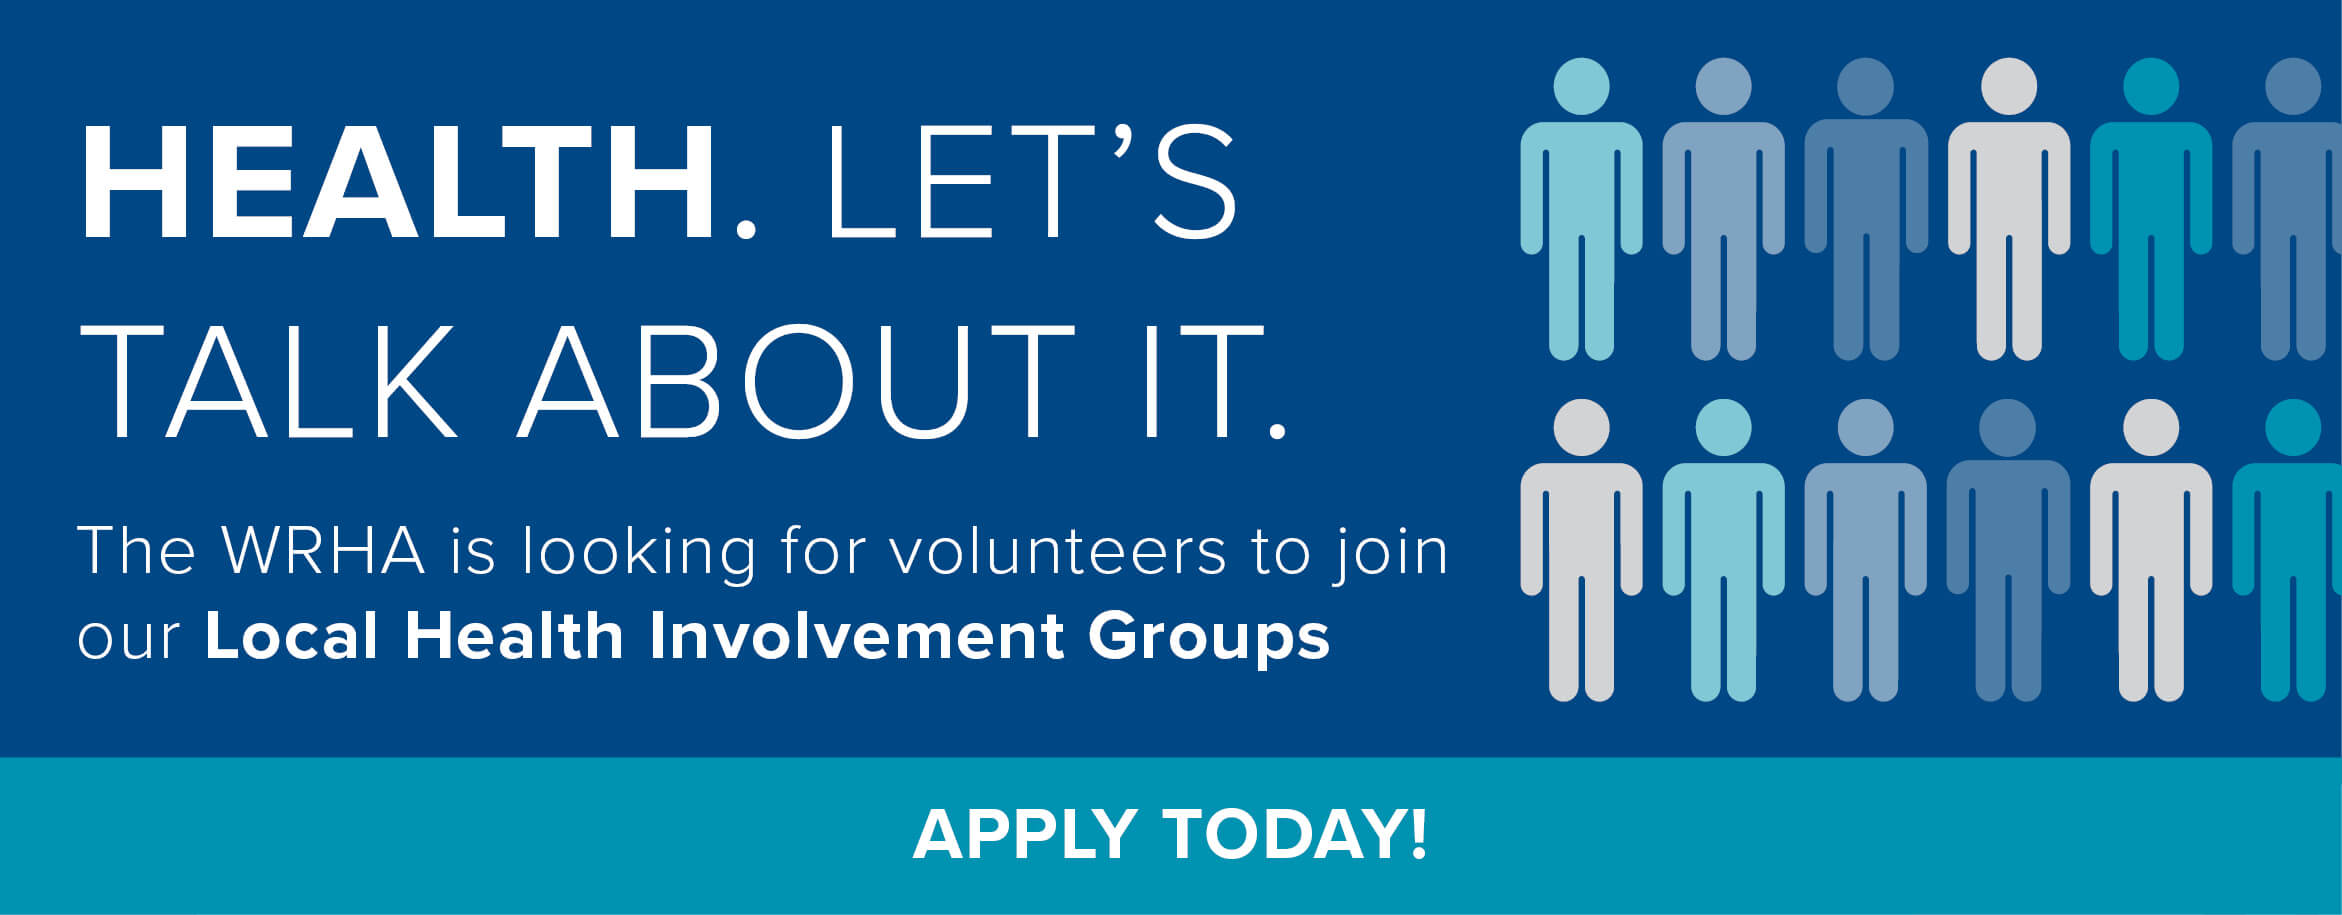 The WRHA is looking for volunteers to join our Local Health Involvement Groups (LHIGs)